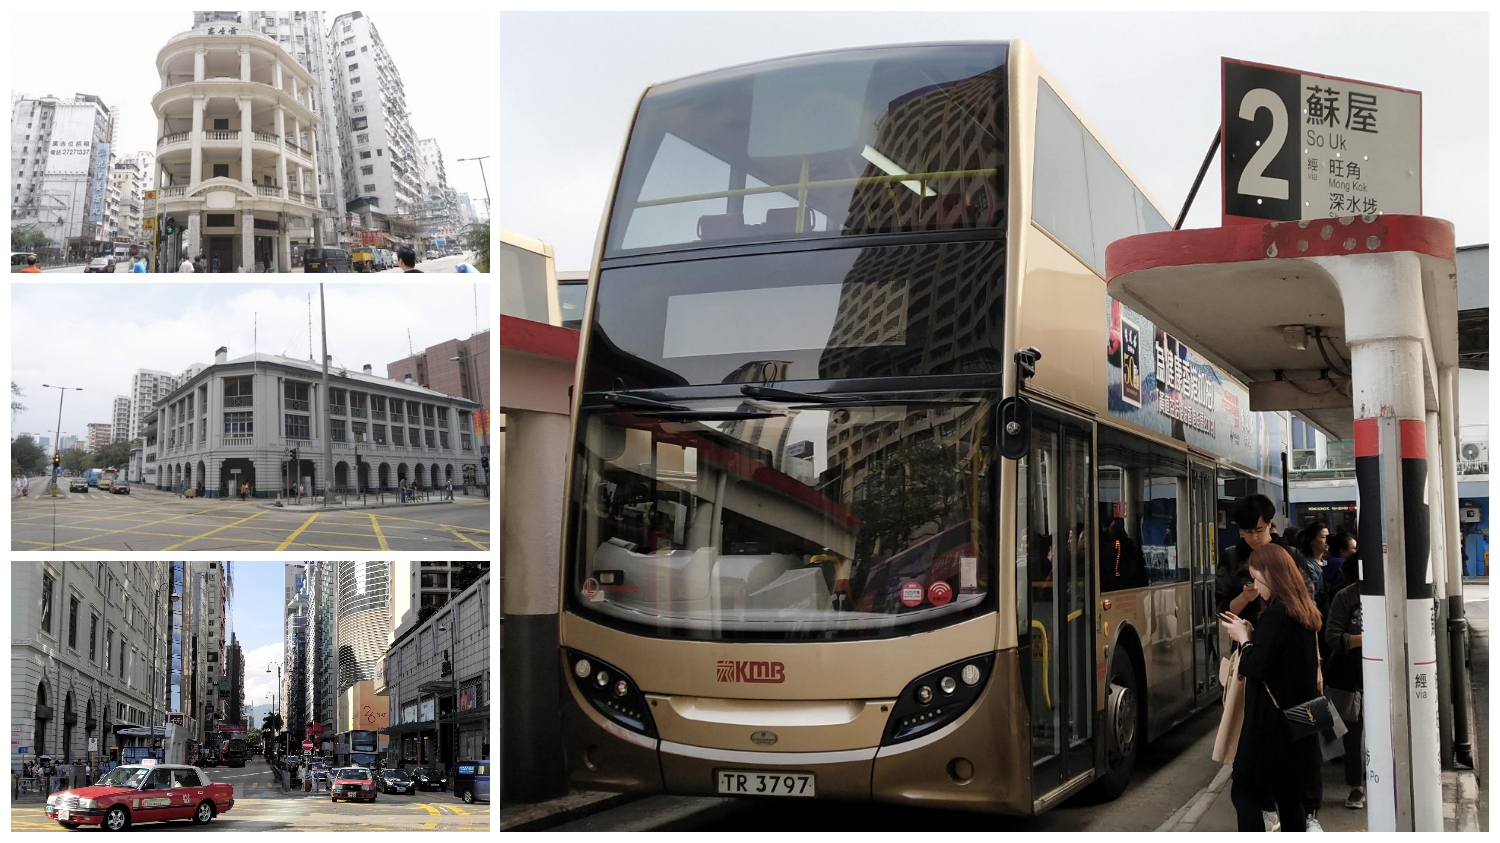 Take KMB bus route No 2 to go back to ancient Han tomb museum from modern Kowloon